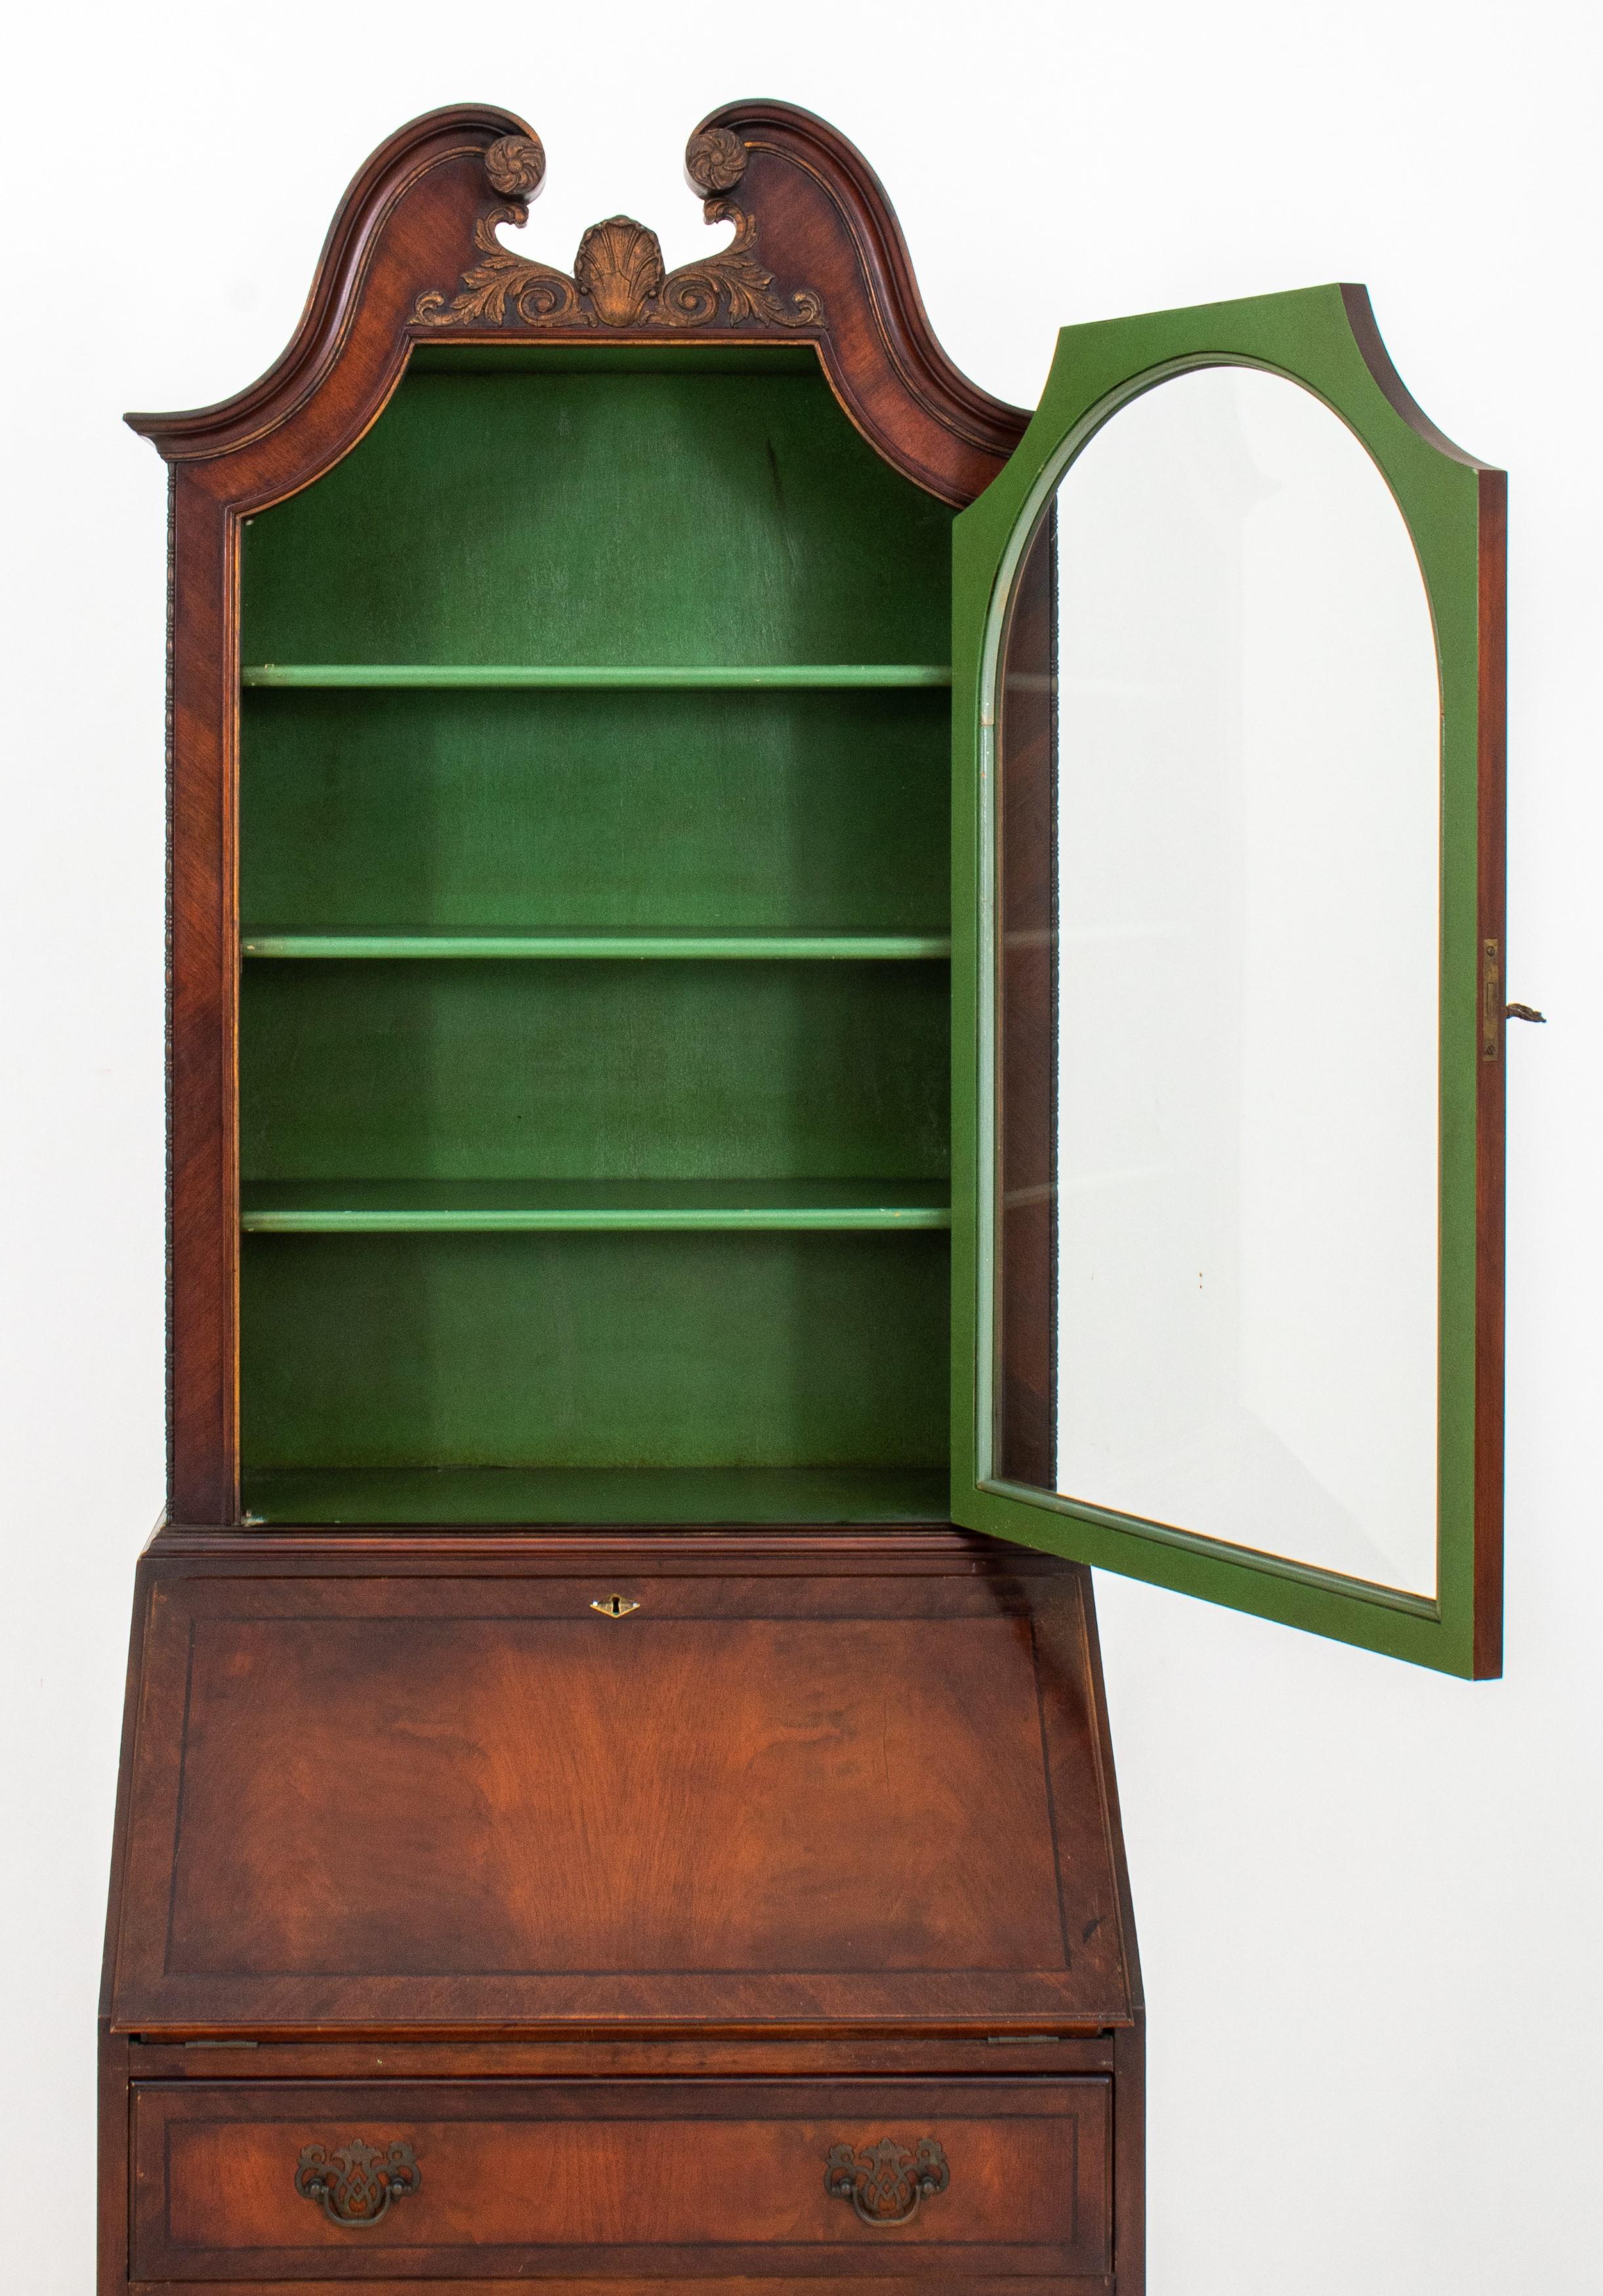 Chippendale style mahogany secretary bookcase. Here are the details:

Style: Chippendale
Material: Mahogany
Features:
Scrolling broken swan's neck pediment finial
Glass cabinet door with green lacquered interior and three shelves
Slant front